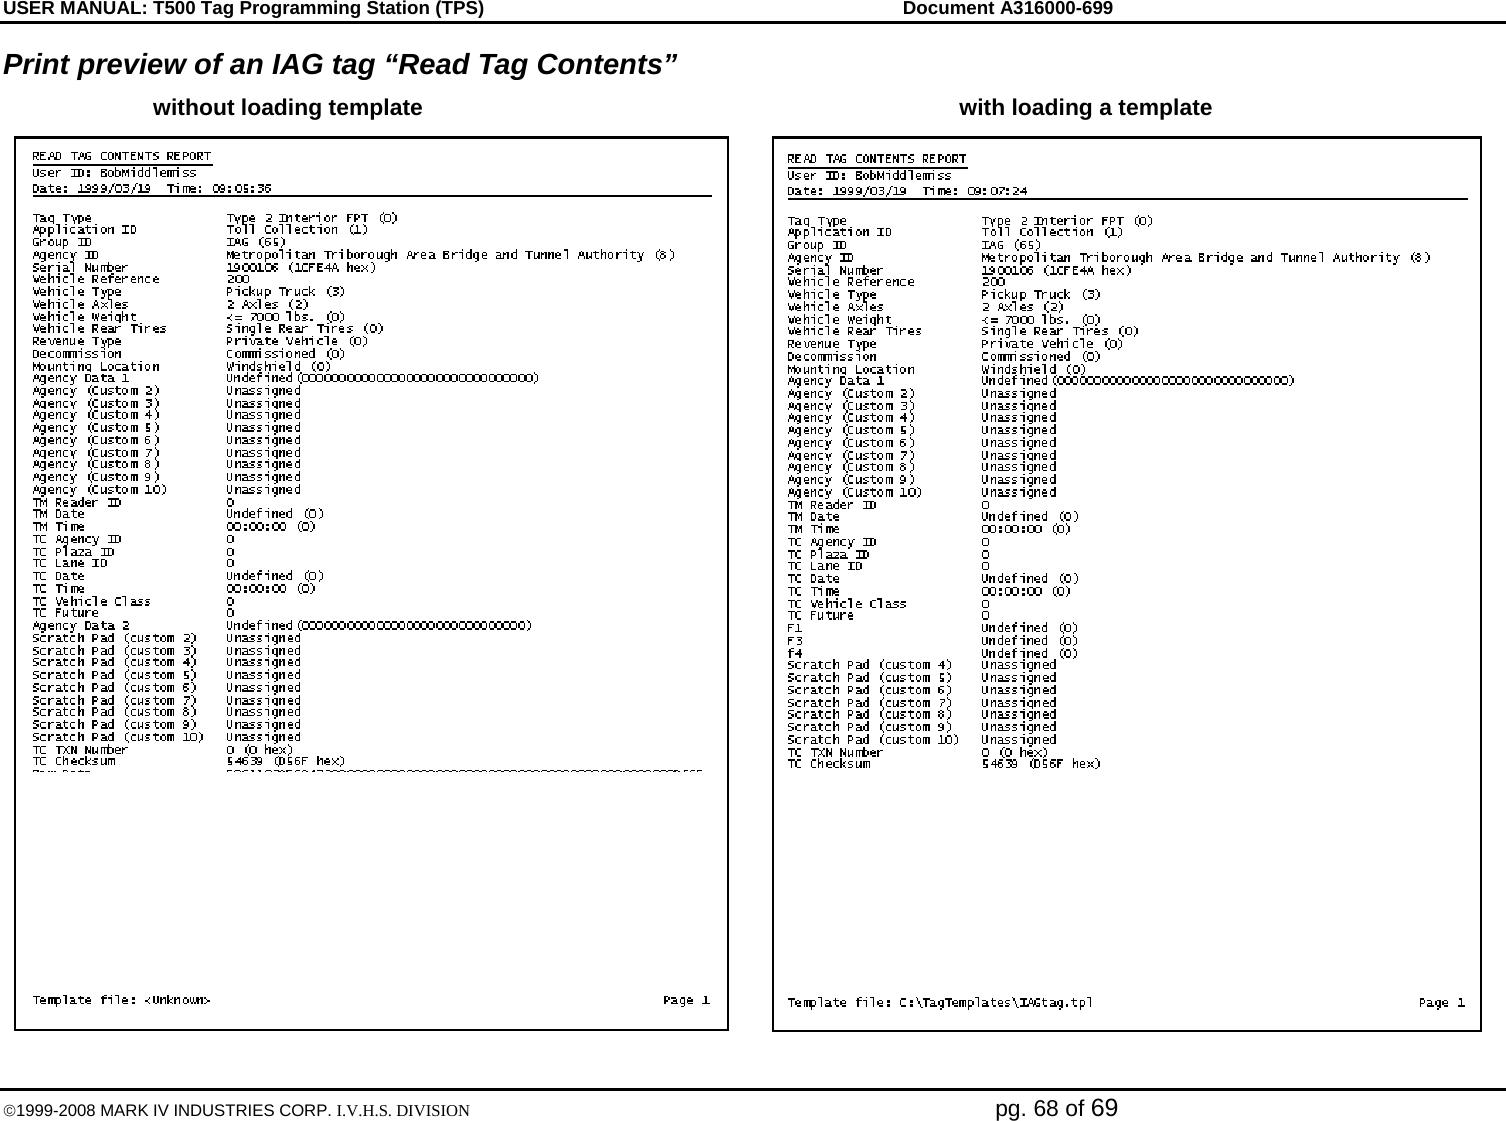 USER MANUAL: T500 Tag Programming Station (TPS)     Document A316000-699  ©1999-2008 MARK IV INDUSTRIES CORP. I.V.H.S. DIVISION   pg. 68 of 69 Print preview of an IAG tag “Read Tag Contents”   without loading template  with loading a template   